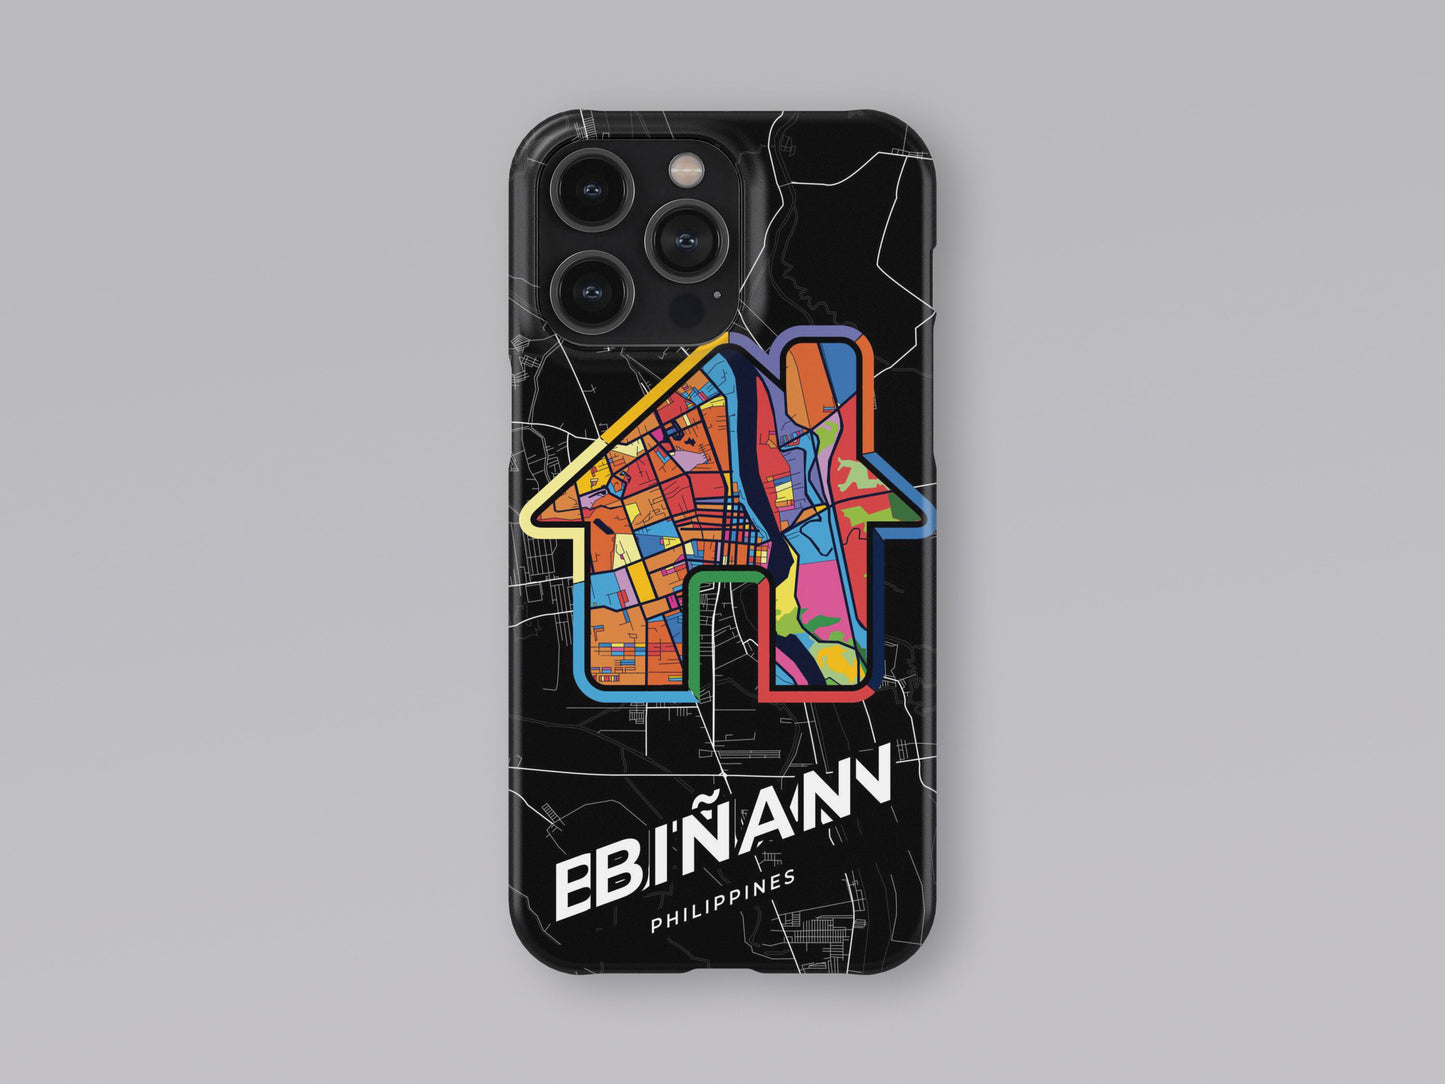 Biñan Philippines slim phone case with colorful icon. Birthday, wedding or housewarming gift. Couple match cases. 3